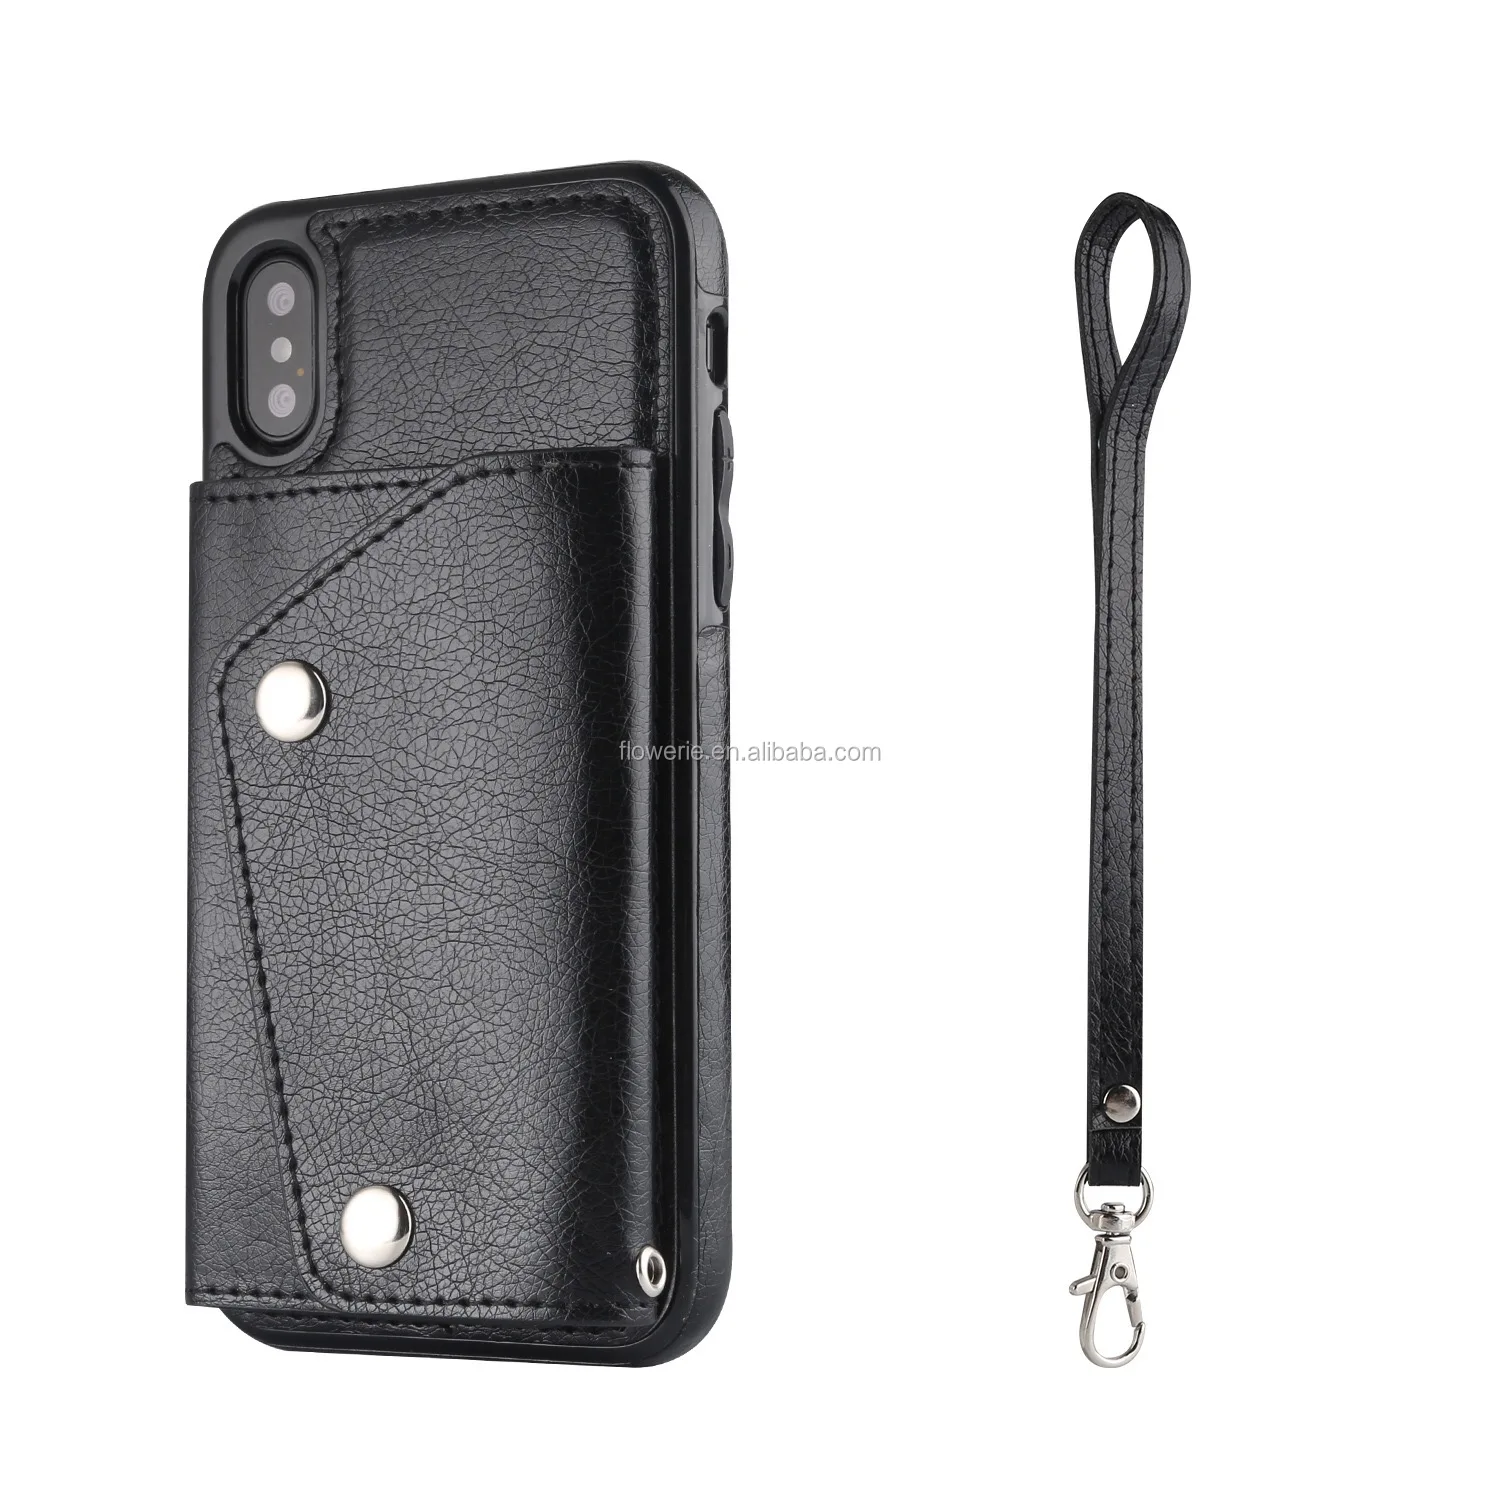 Wholesale Mobile Phone For iPhone X Wallet Cover Luxury Magnetic Flip Leather Case With Card Slots